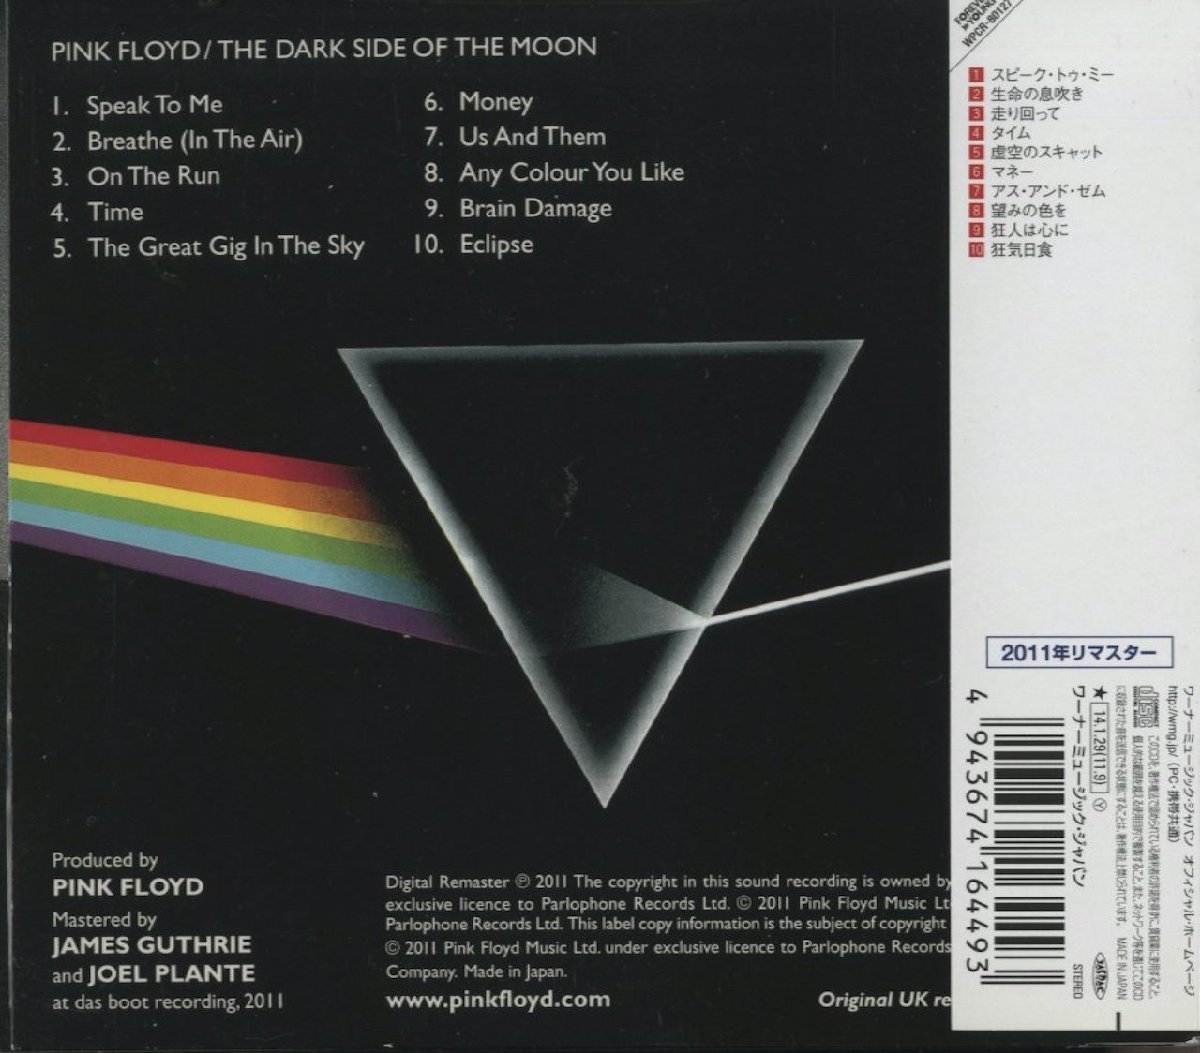 CD/ PINK FLOYD / THE DARK SIDE OF THE MOON 狂気 / ピンク・フロイド / 国内盤 帯 紙ジャケ WPCR-80127 40213M_画像2